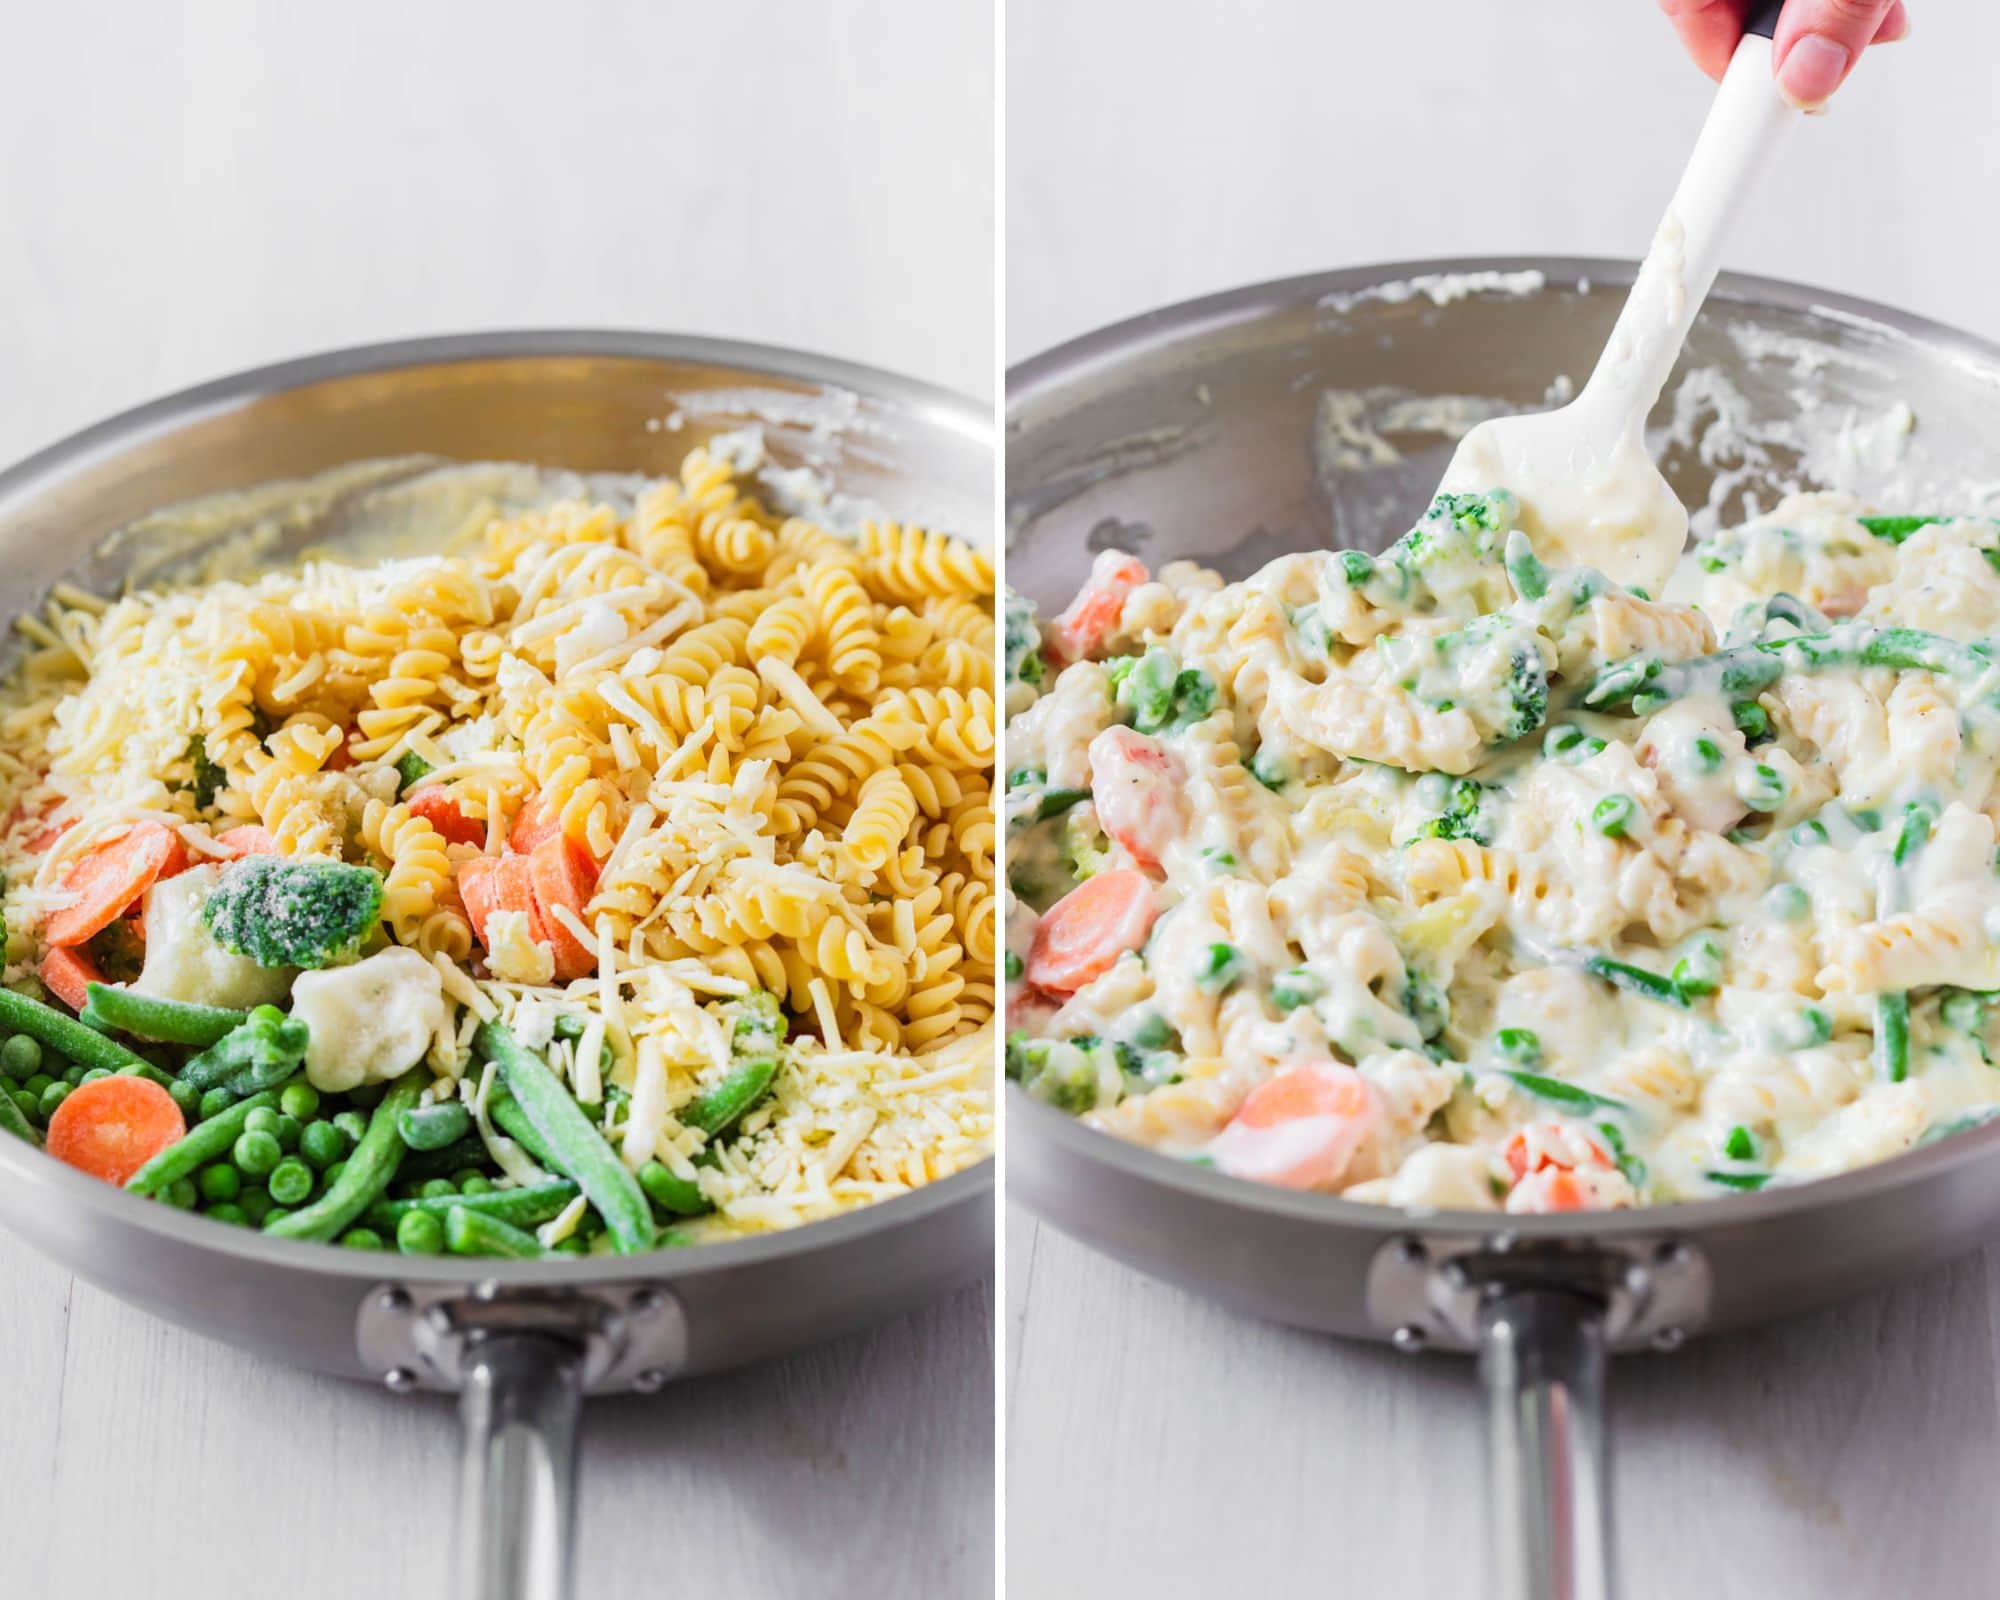 Combining frozen vegetables, cooked pasta and cheese with white sauce in skillet.